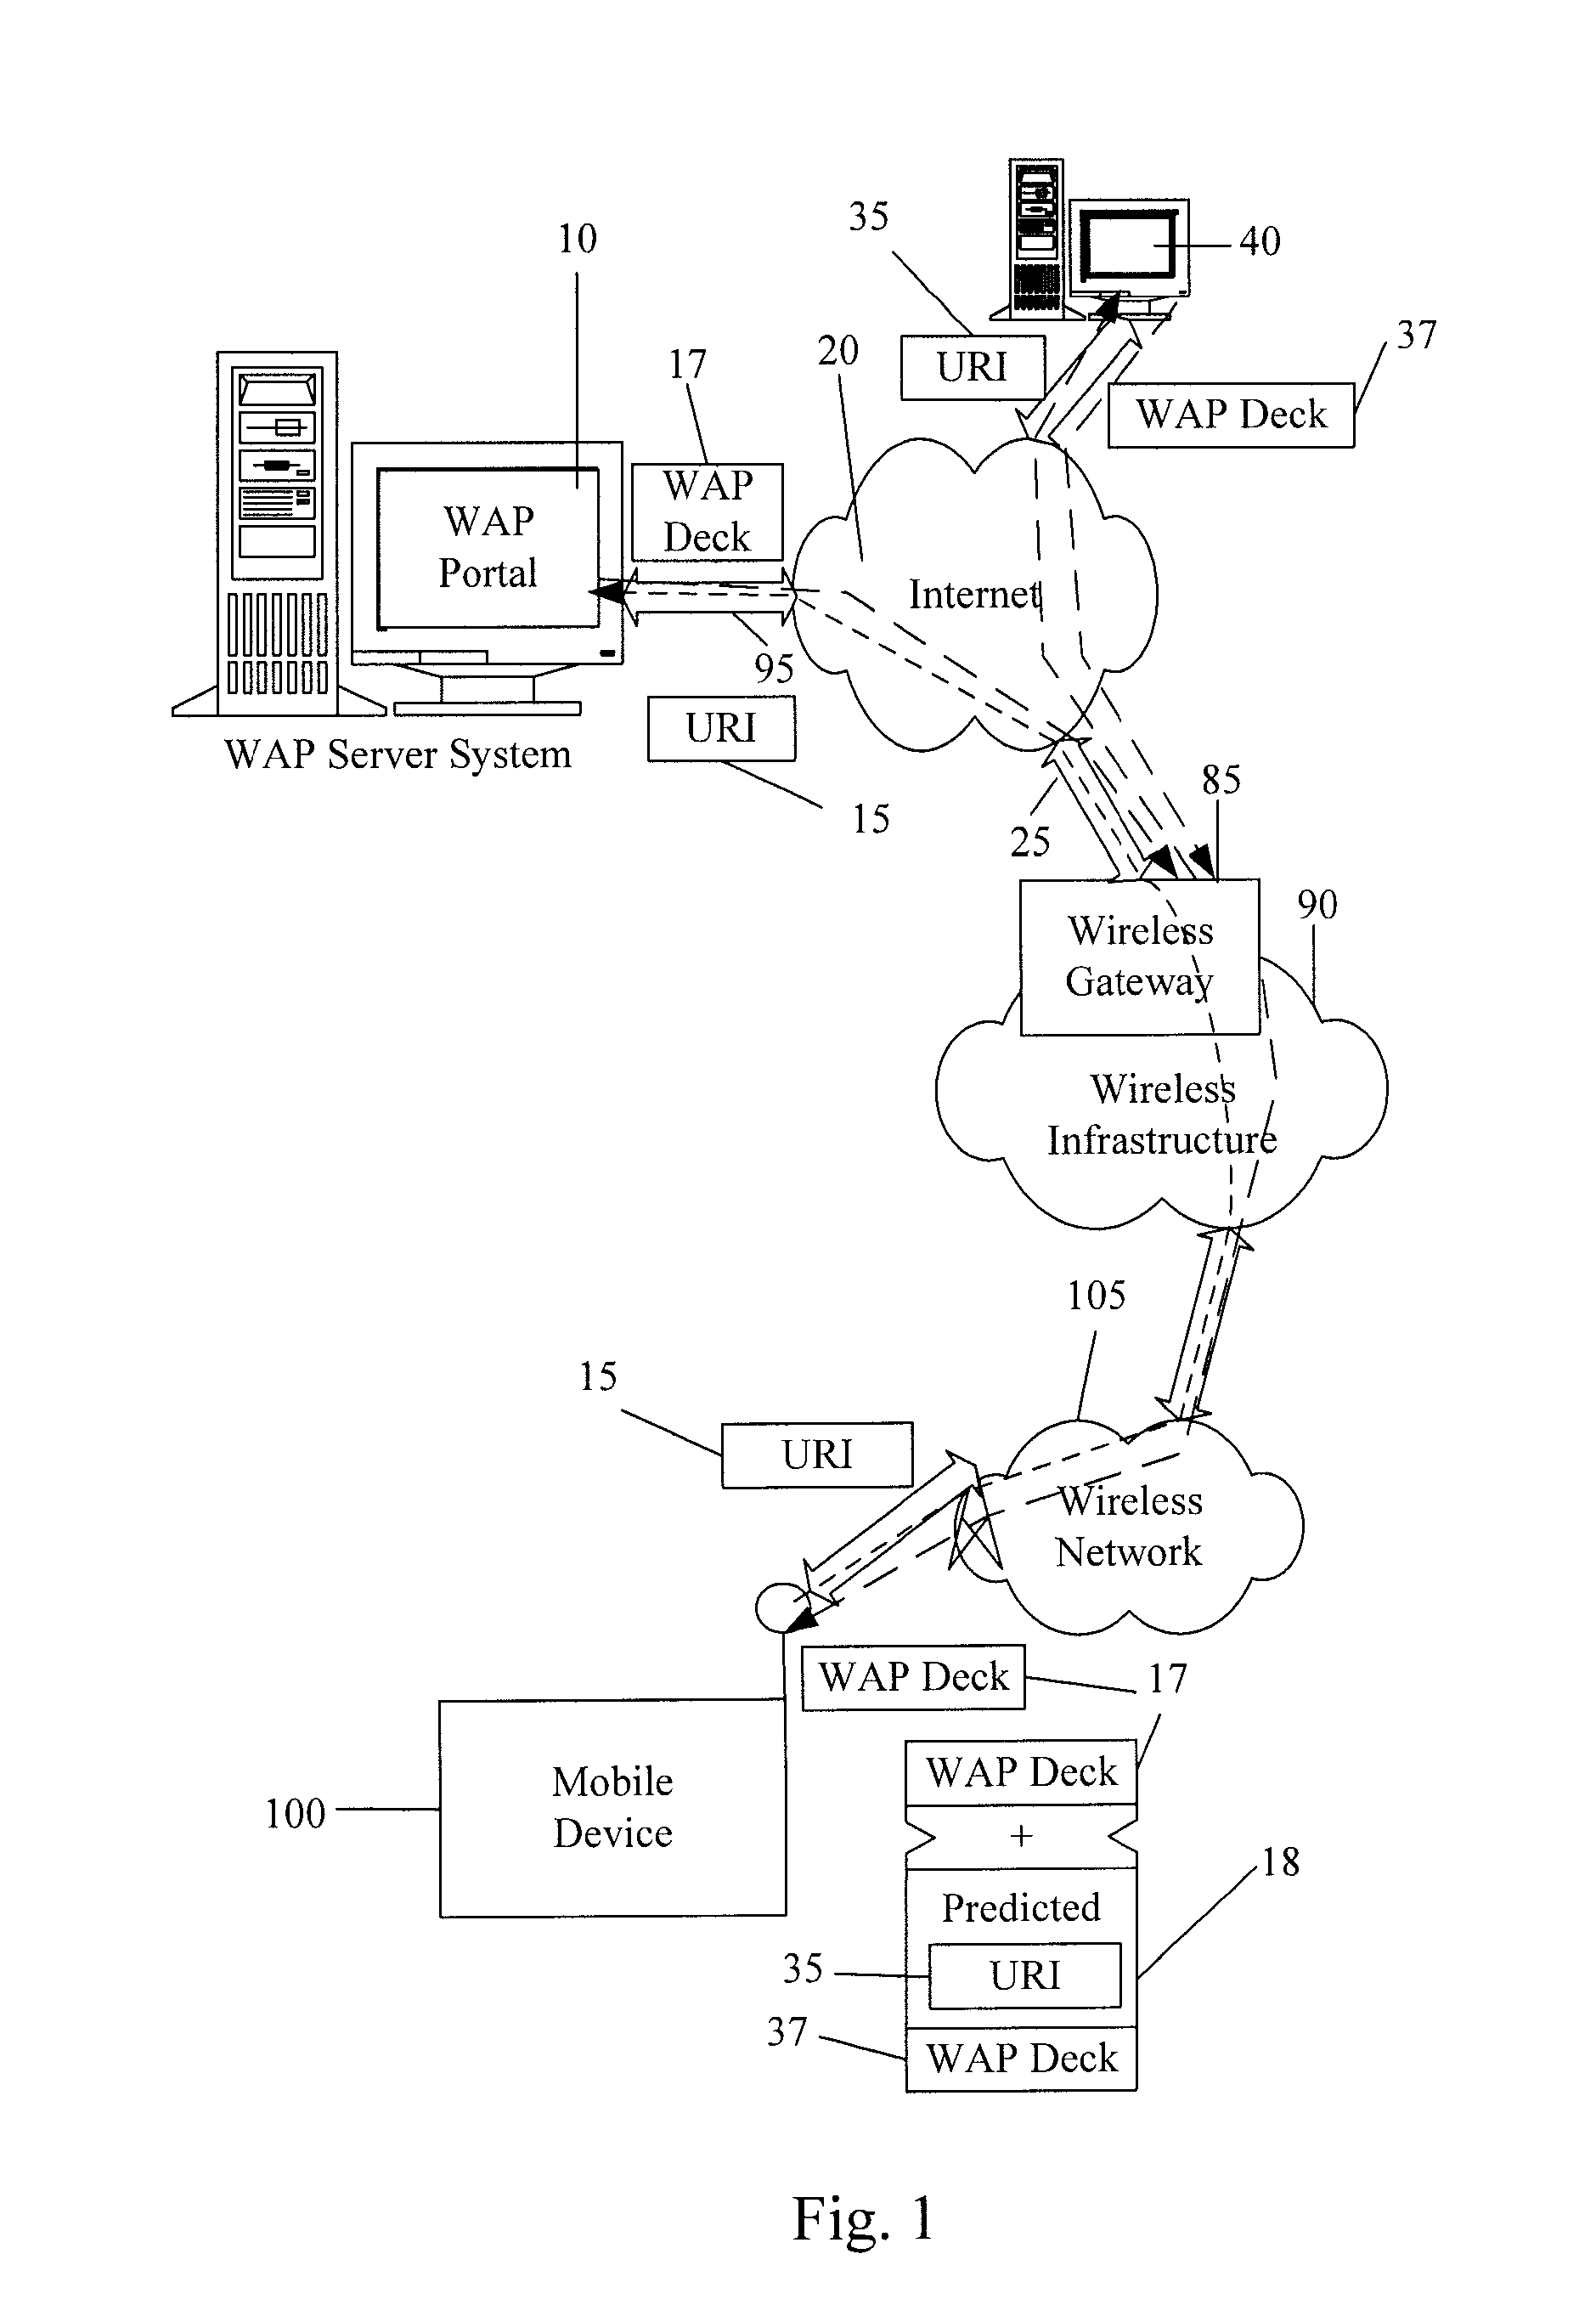 System and Method for Pushing Data to a Mobile Device